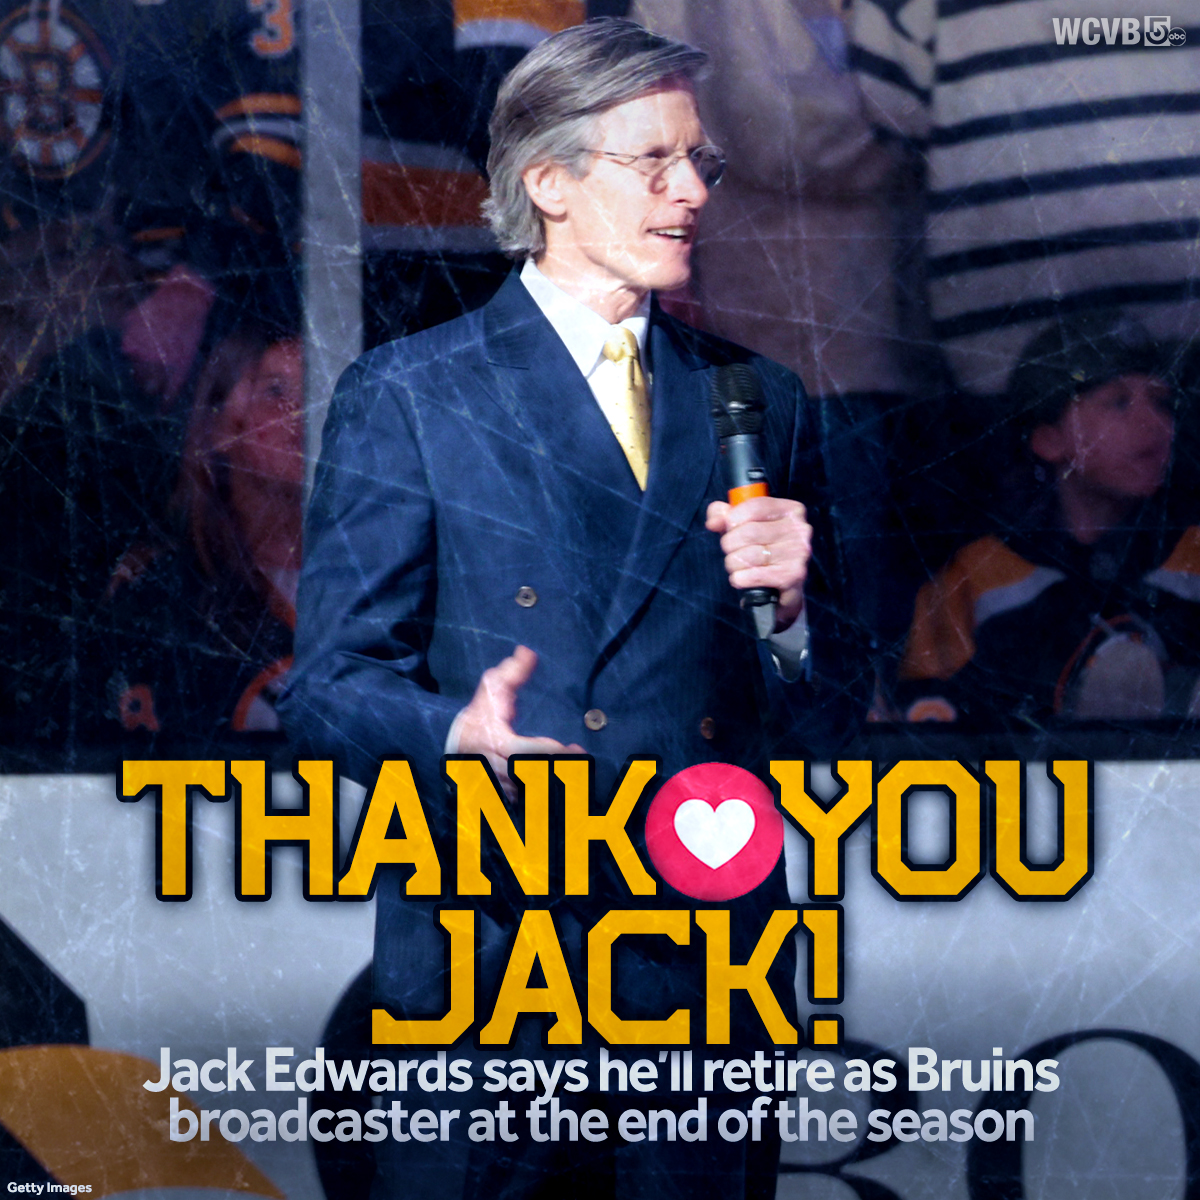 Jack Edwards, the longtime voice of the Boston Bruins, announced Tuesday that he'll be retiring at the end of this season because he is 'no longer able to attain the standards' he set for himself. We're all sending our love to you Jack. 💔🏒